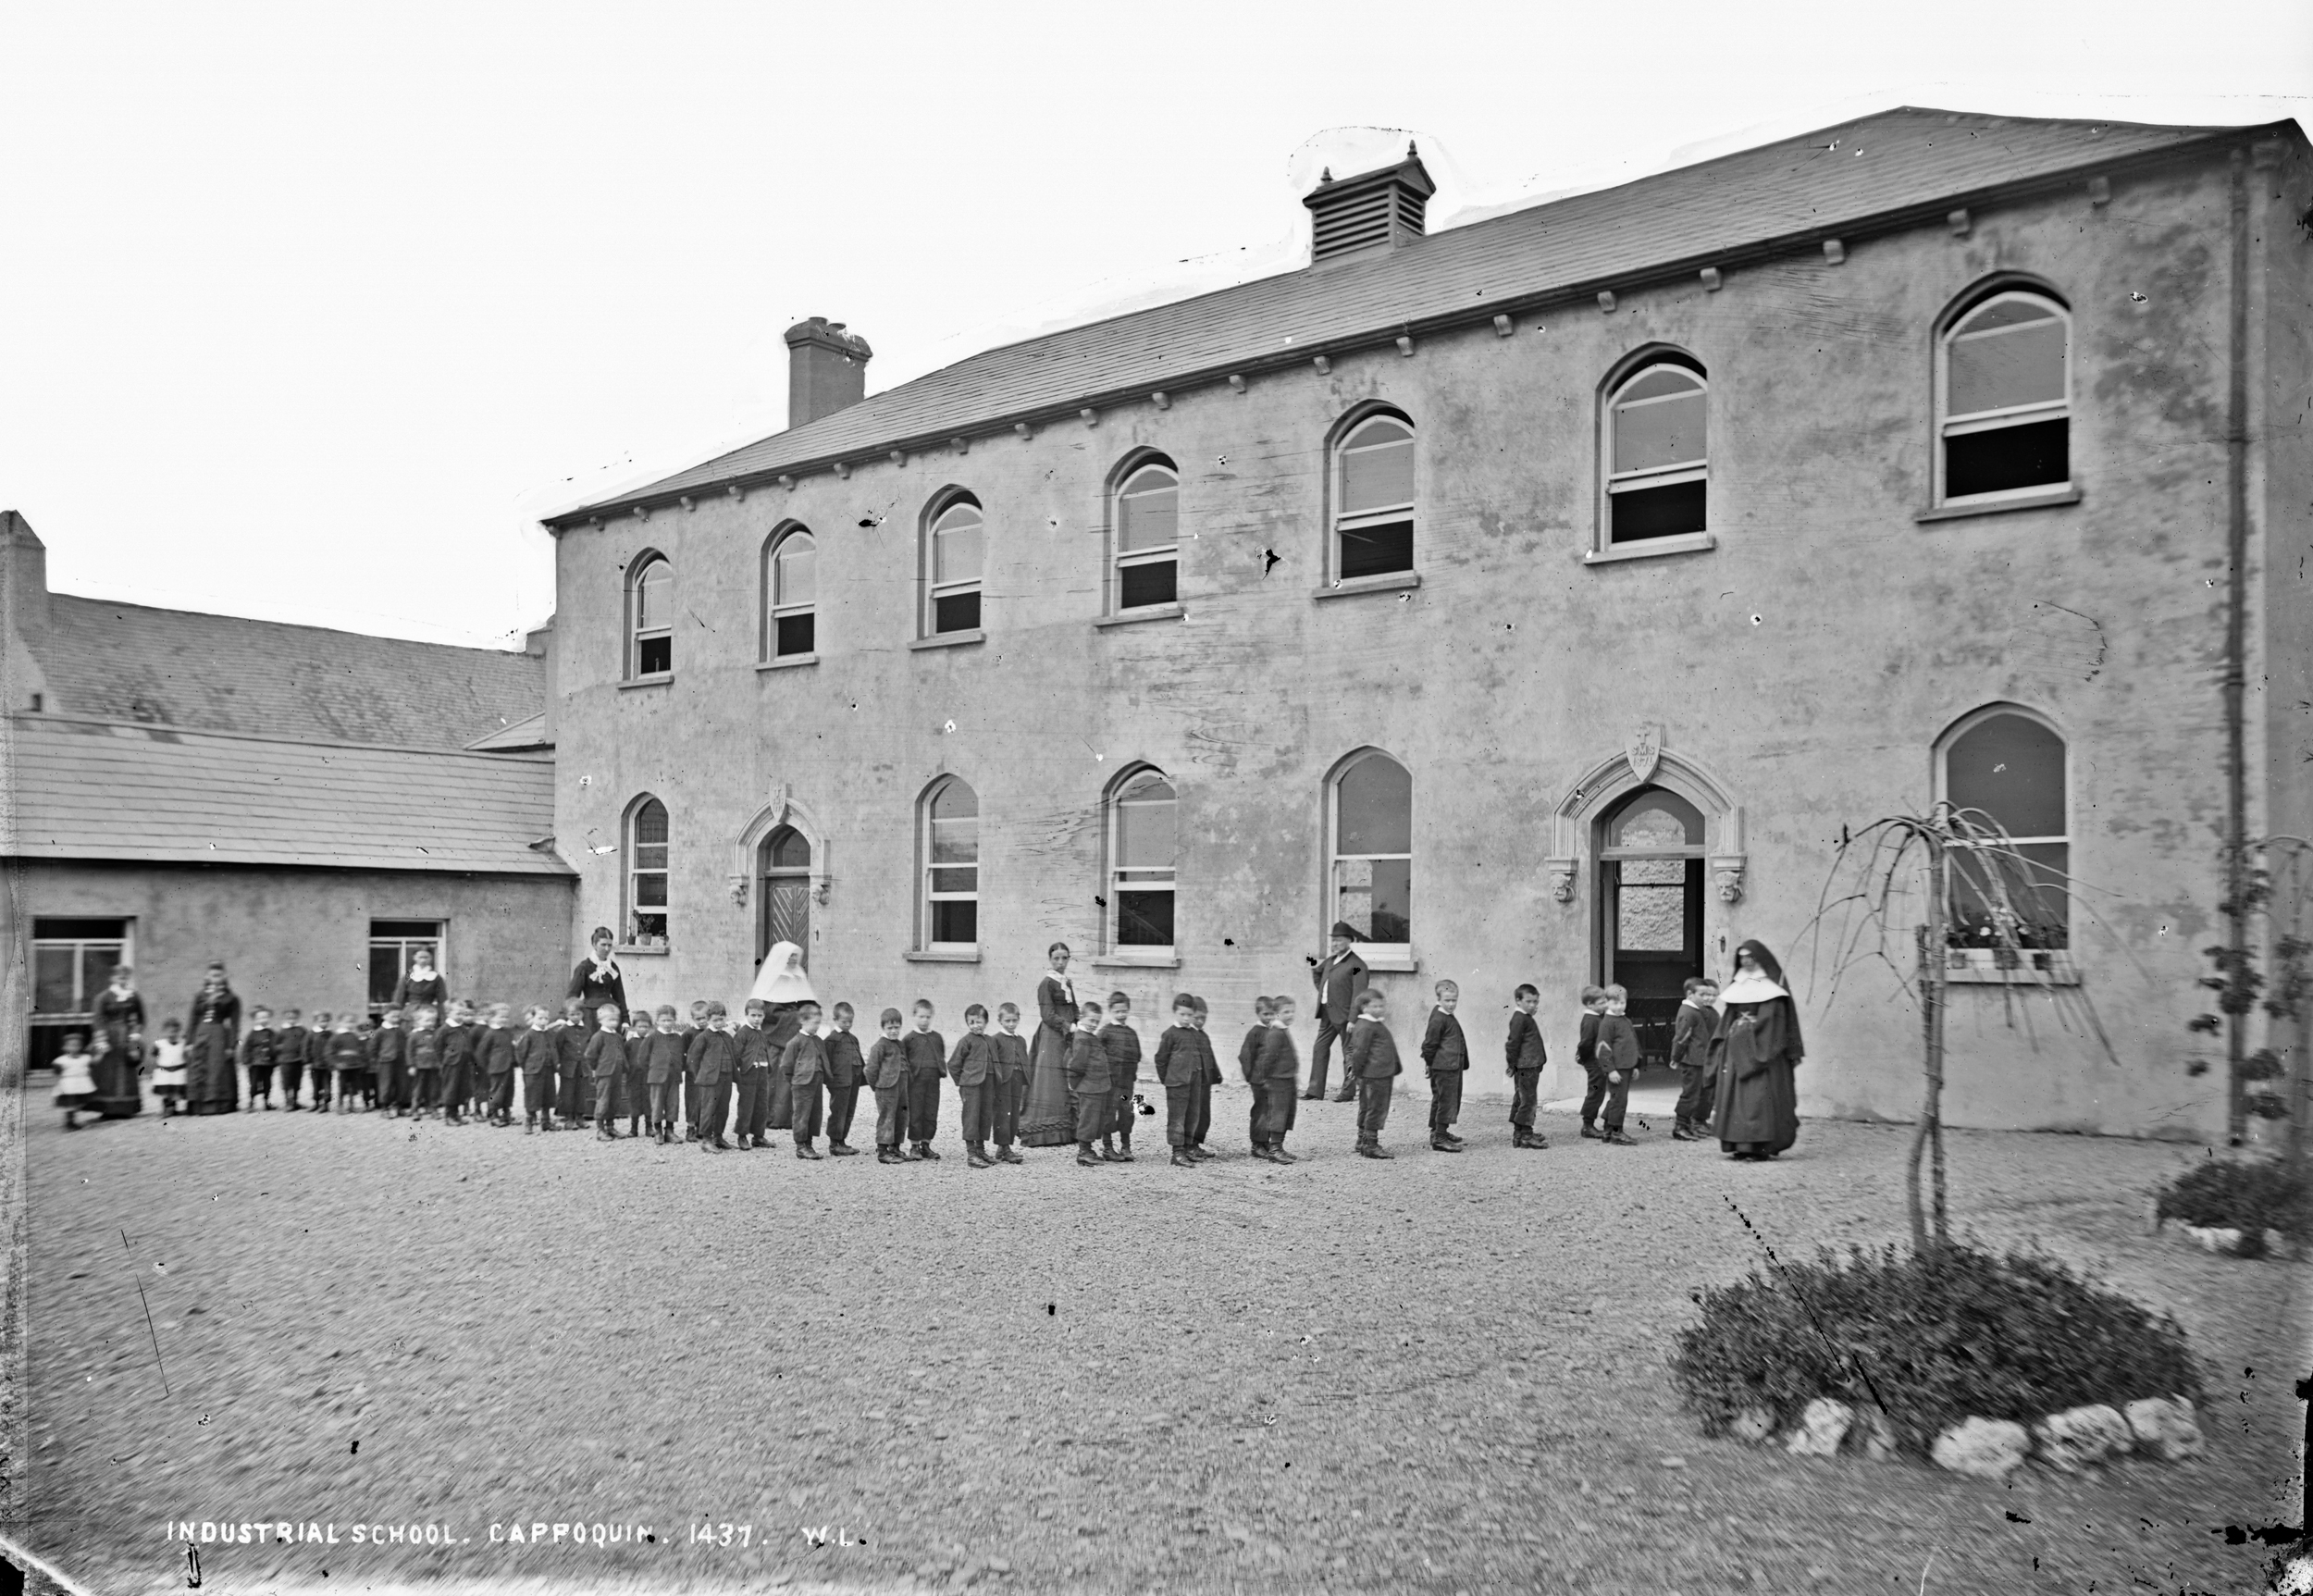 The Industrial School at Cappoquin, Co. Waterford.